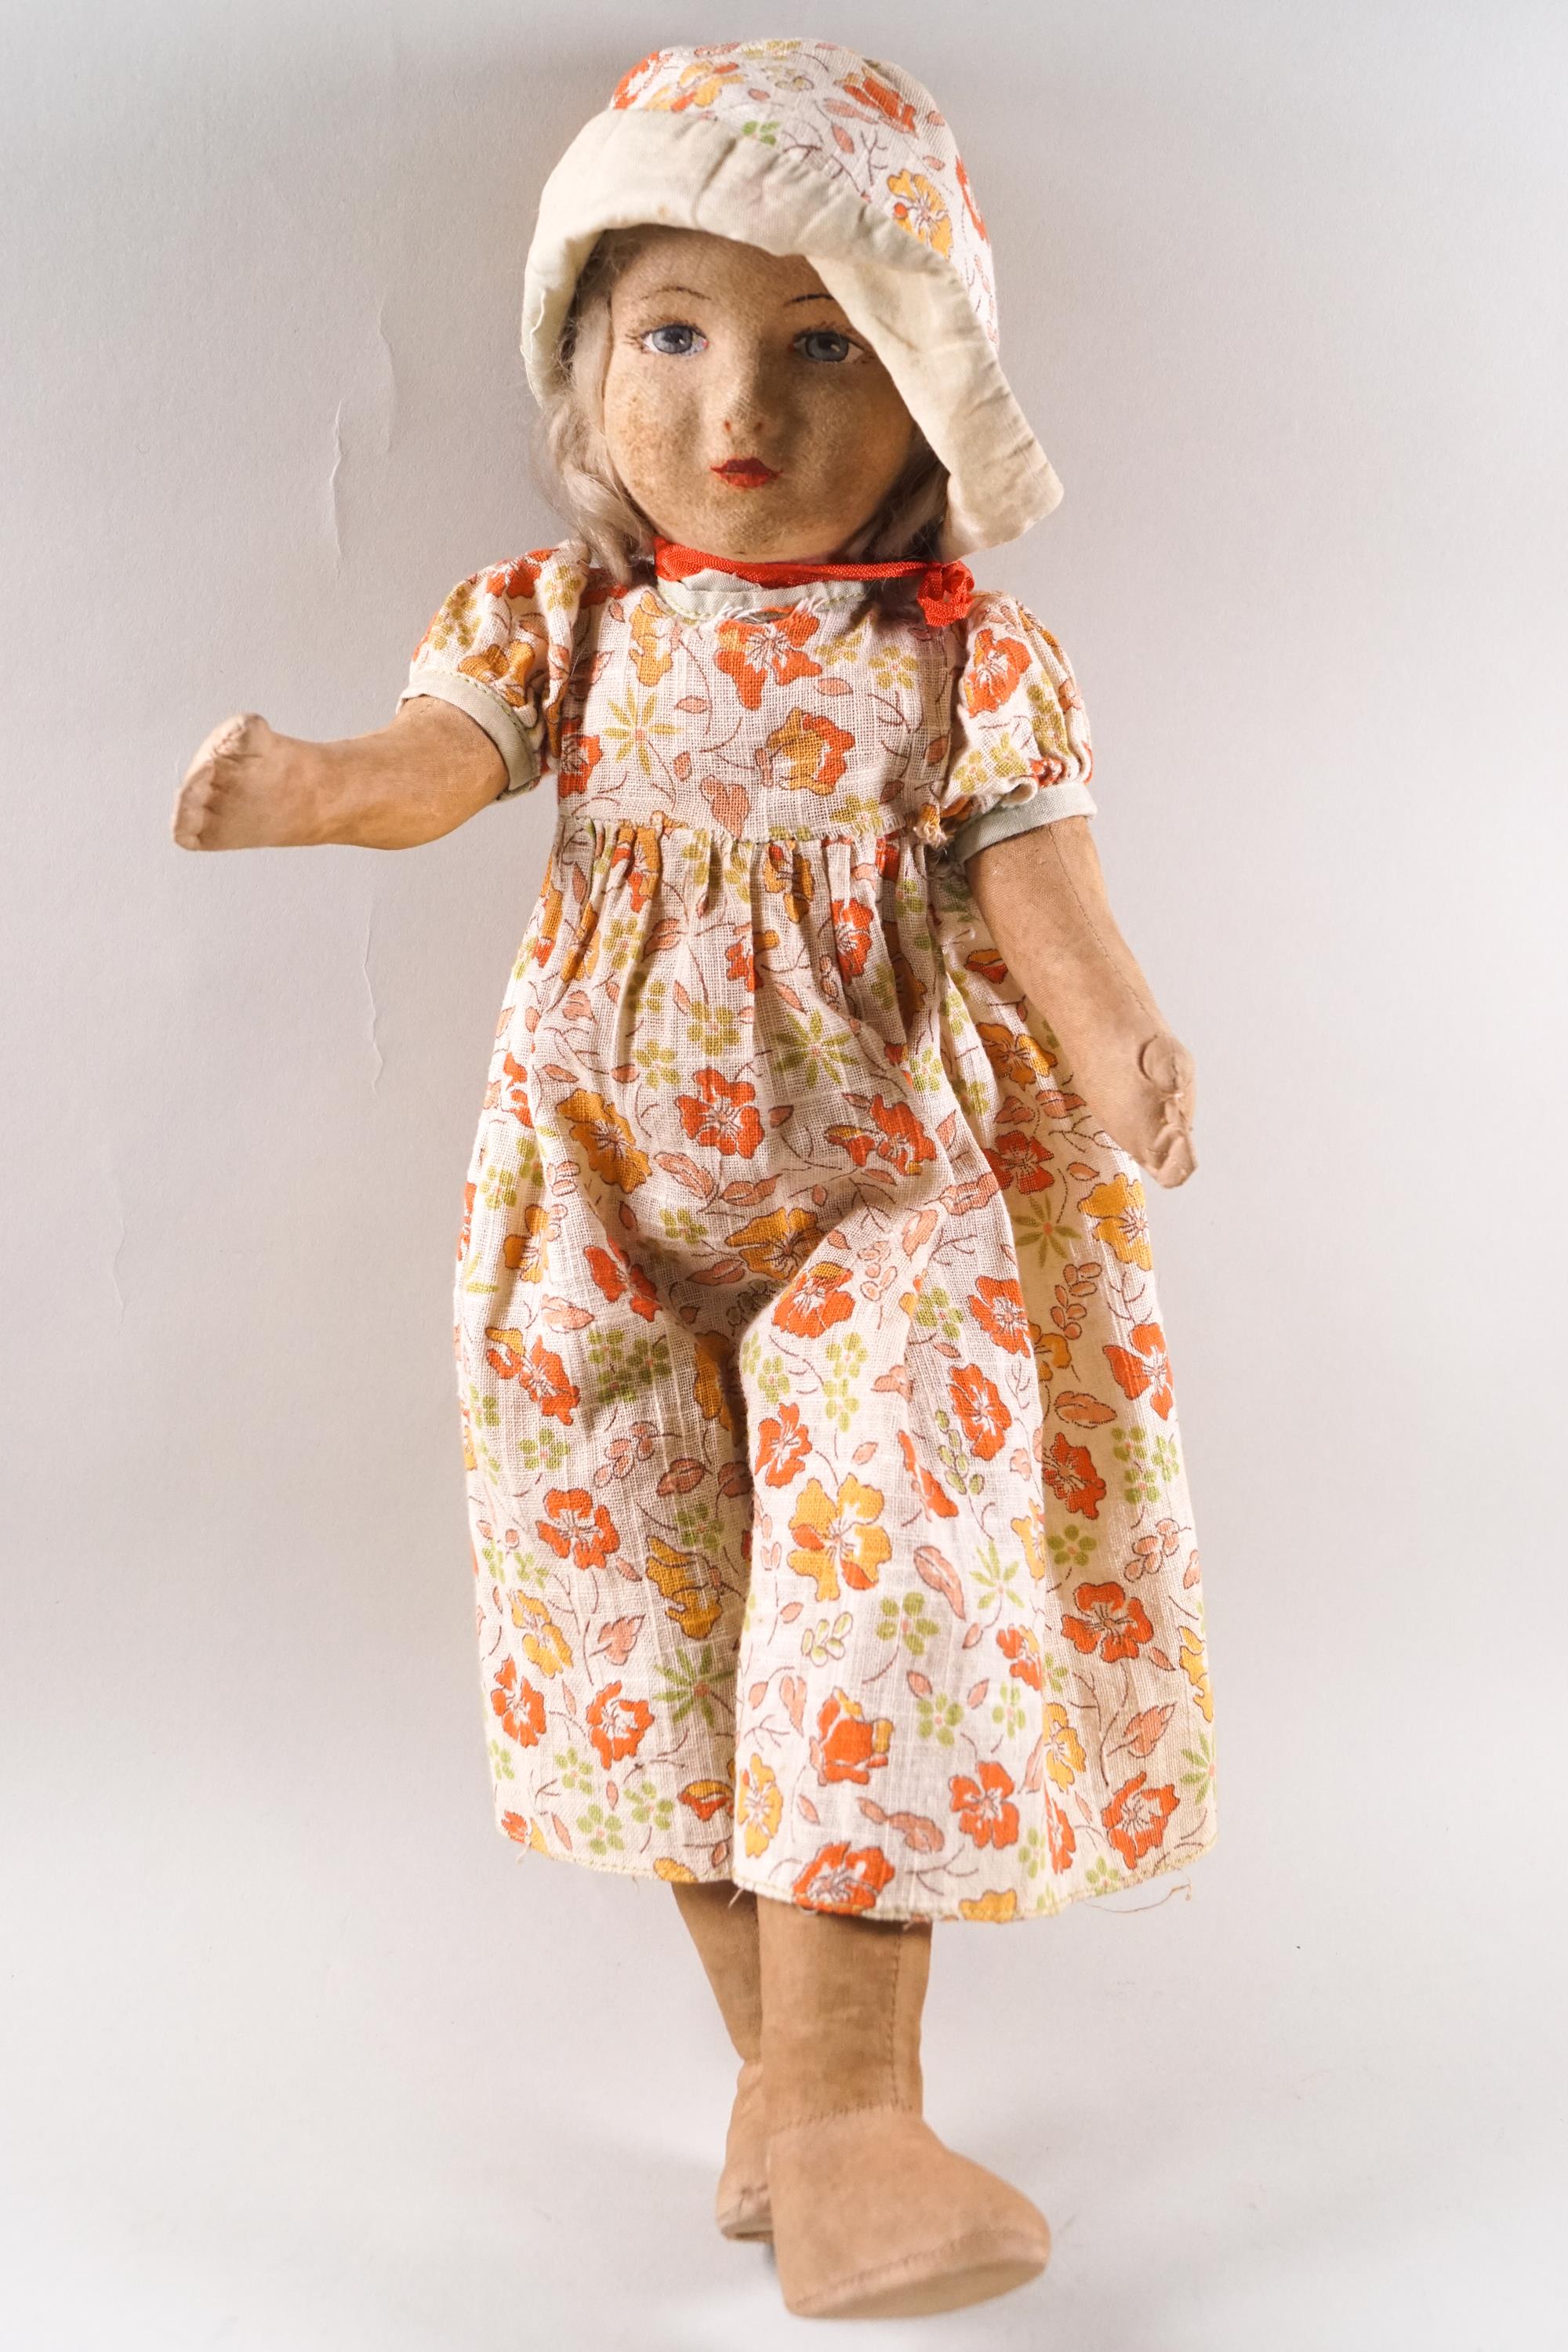 A Chad Valley doll, in the form of a young girl wearing a flower, hat and dress, 42cm high,